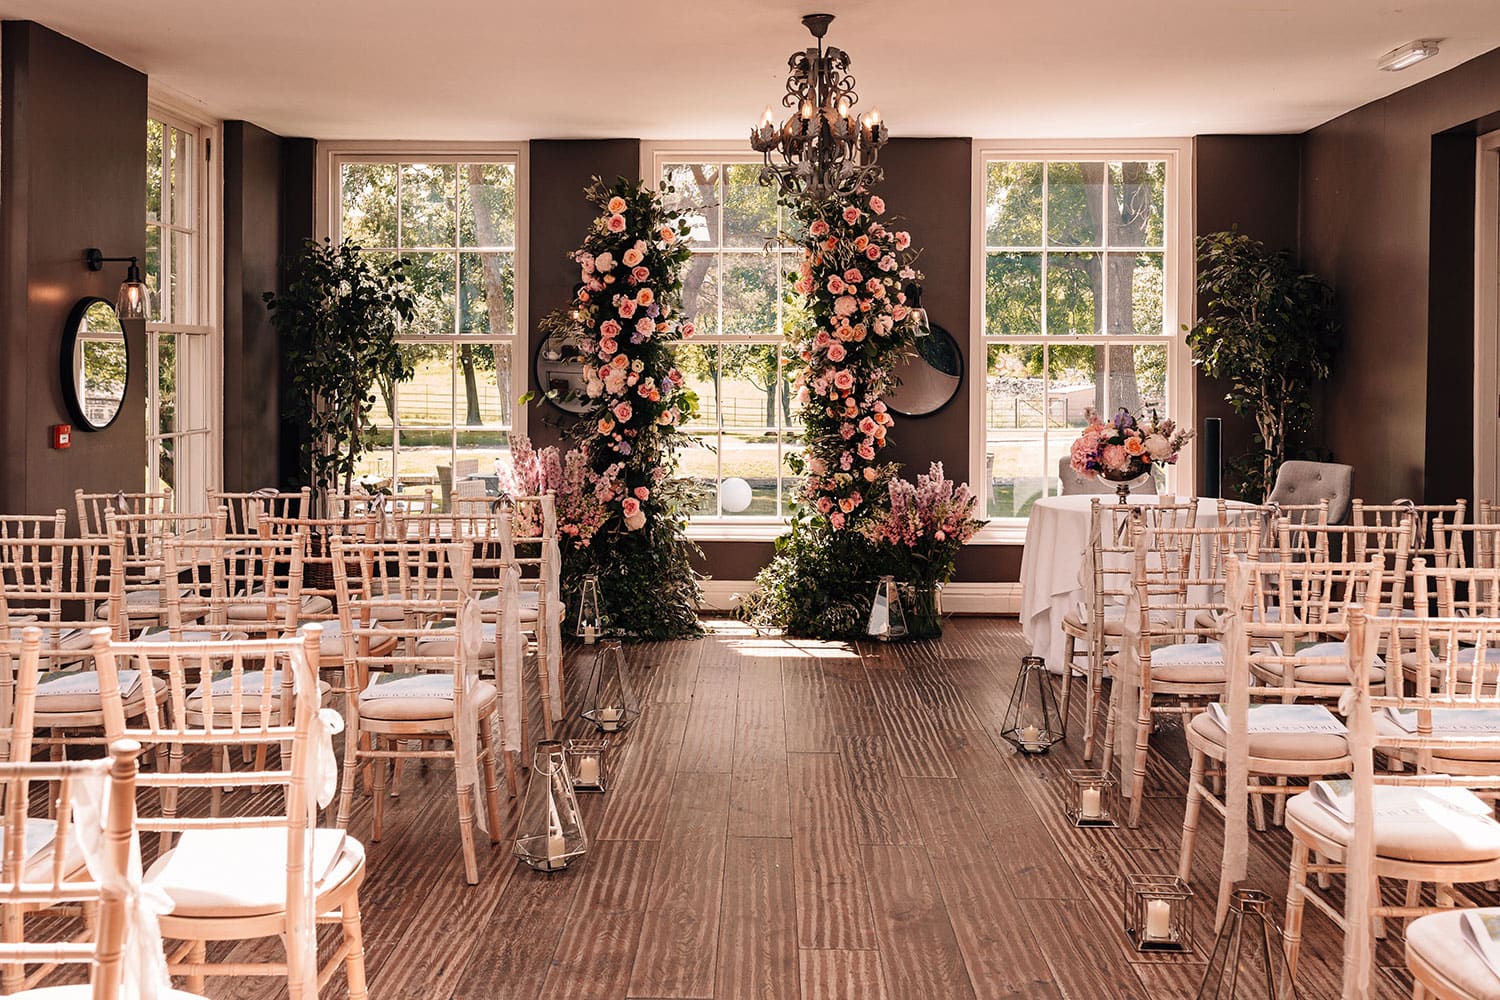 The ceremony room at Yorebridge House Hotel in Yorkshire